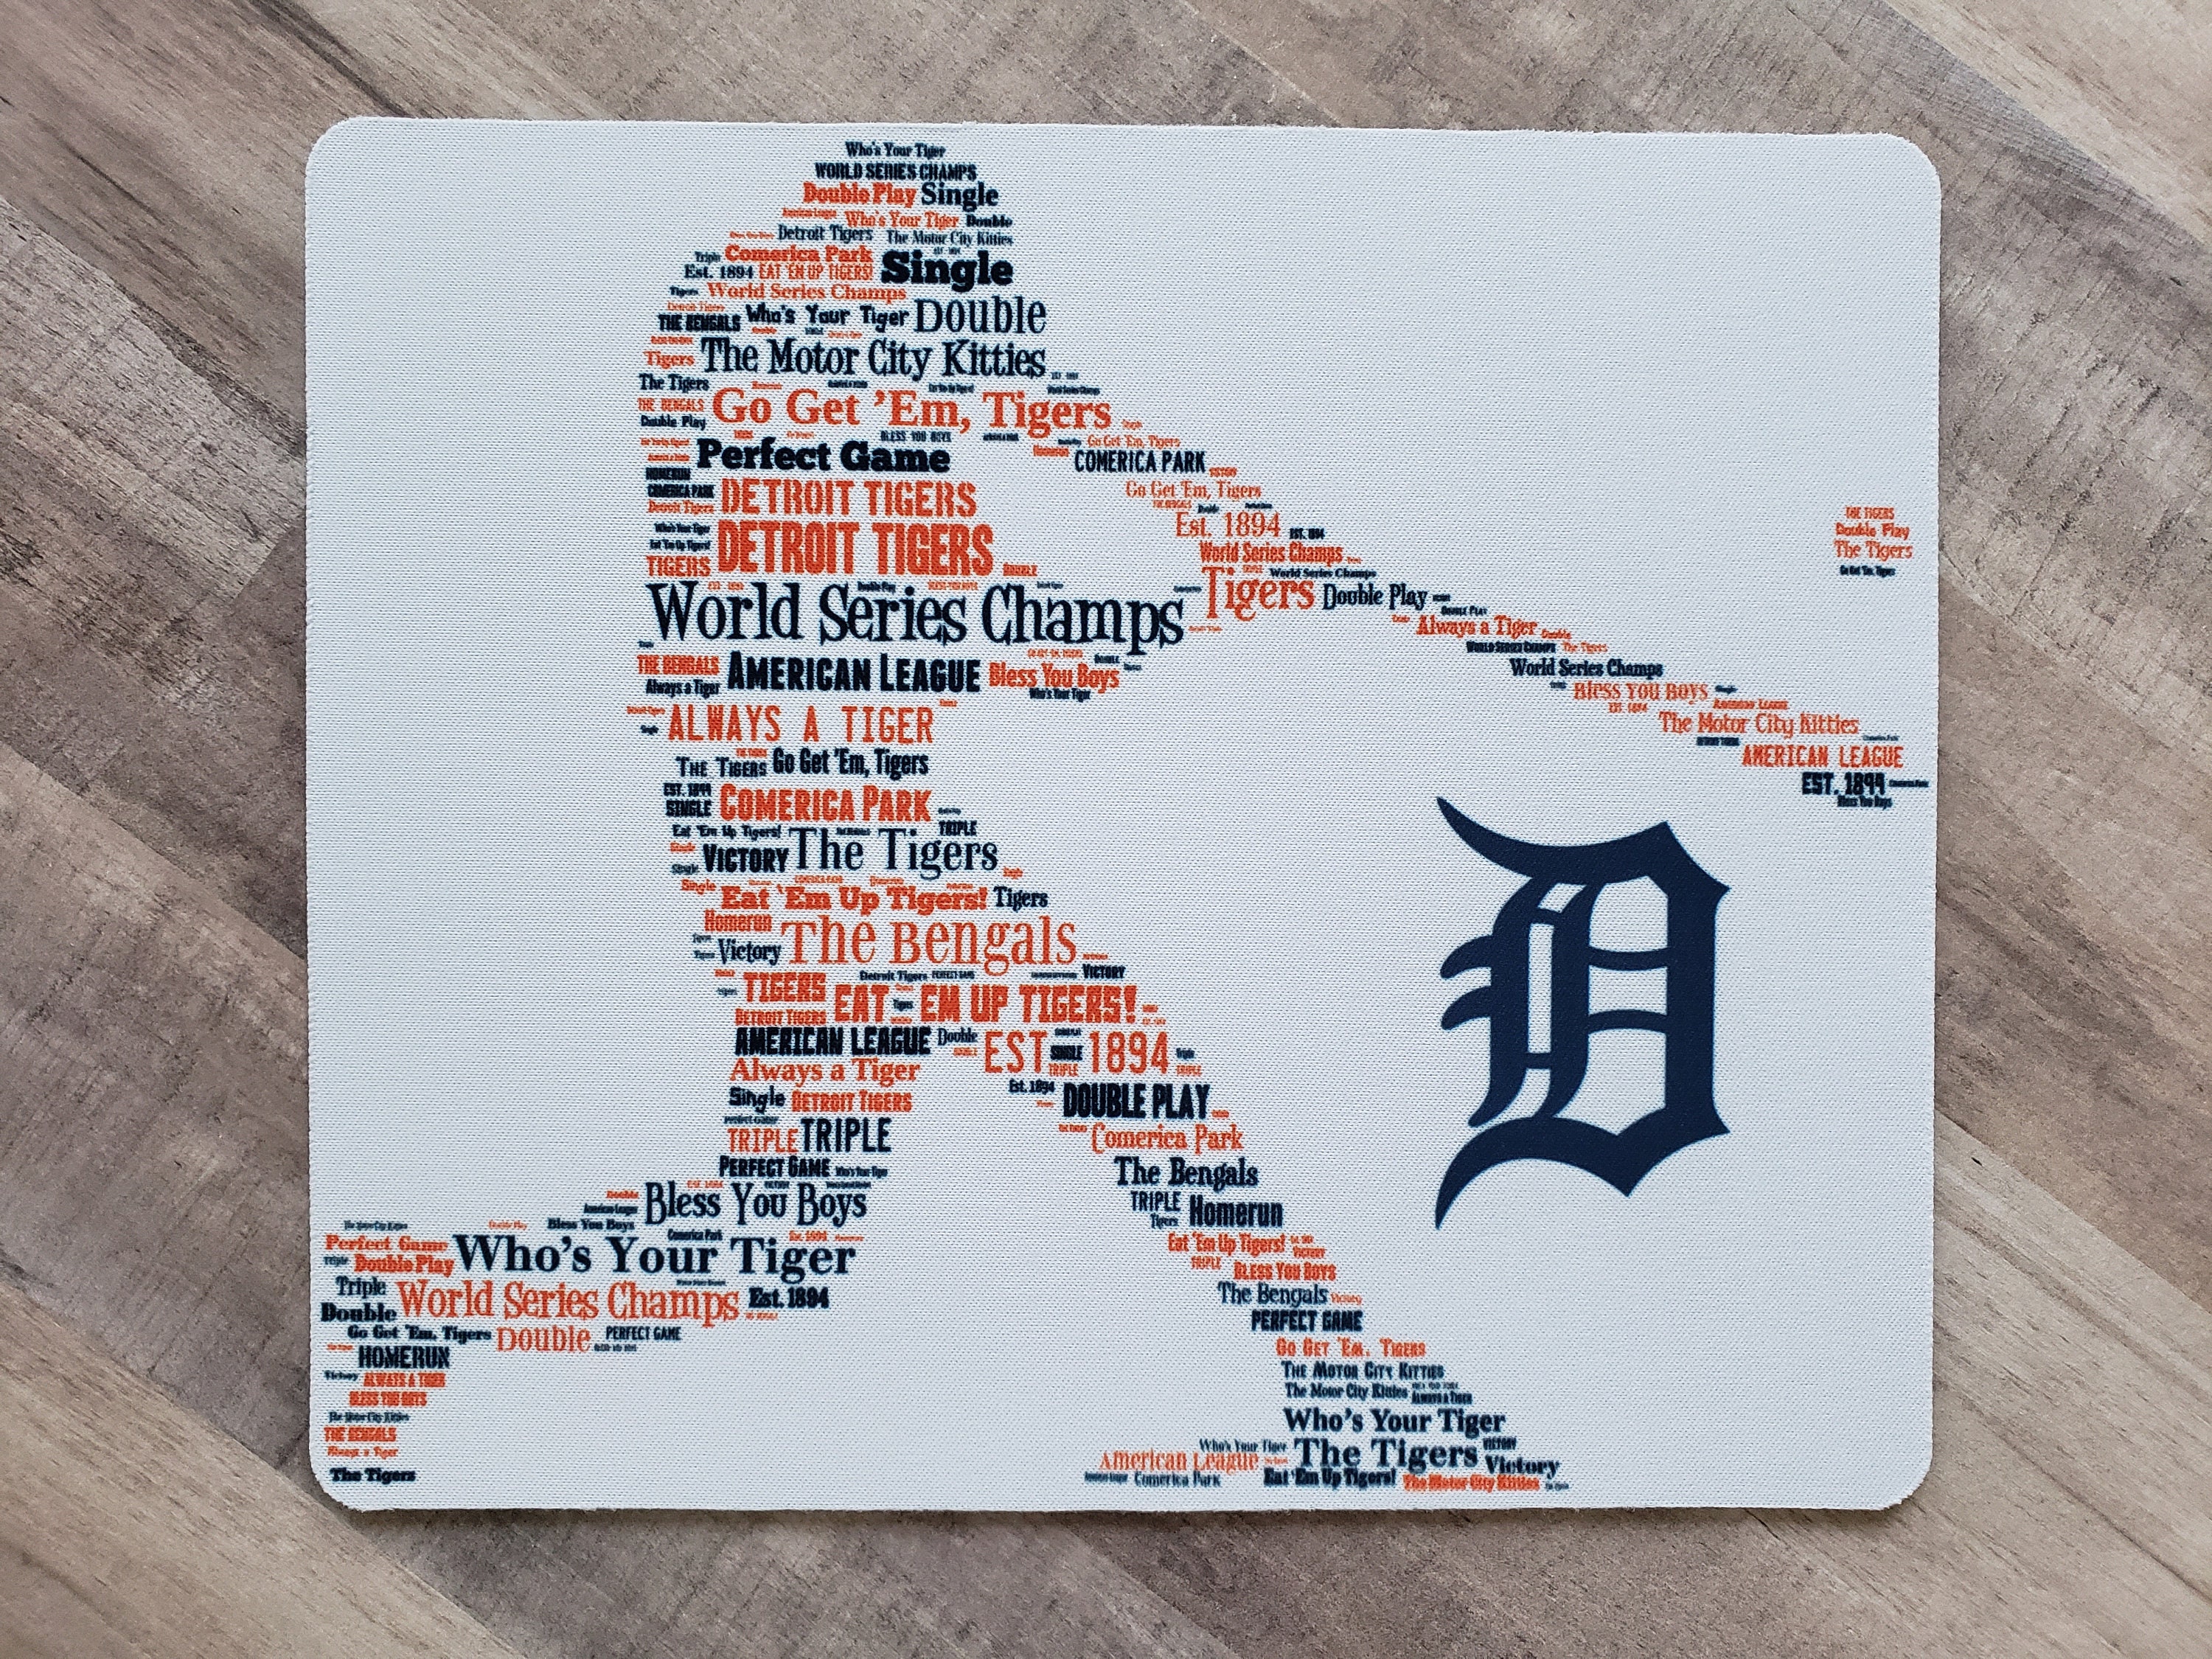 Detroit Mouse Pad For Computer; Gaming; Gifts Men; Desk